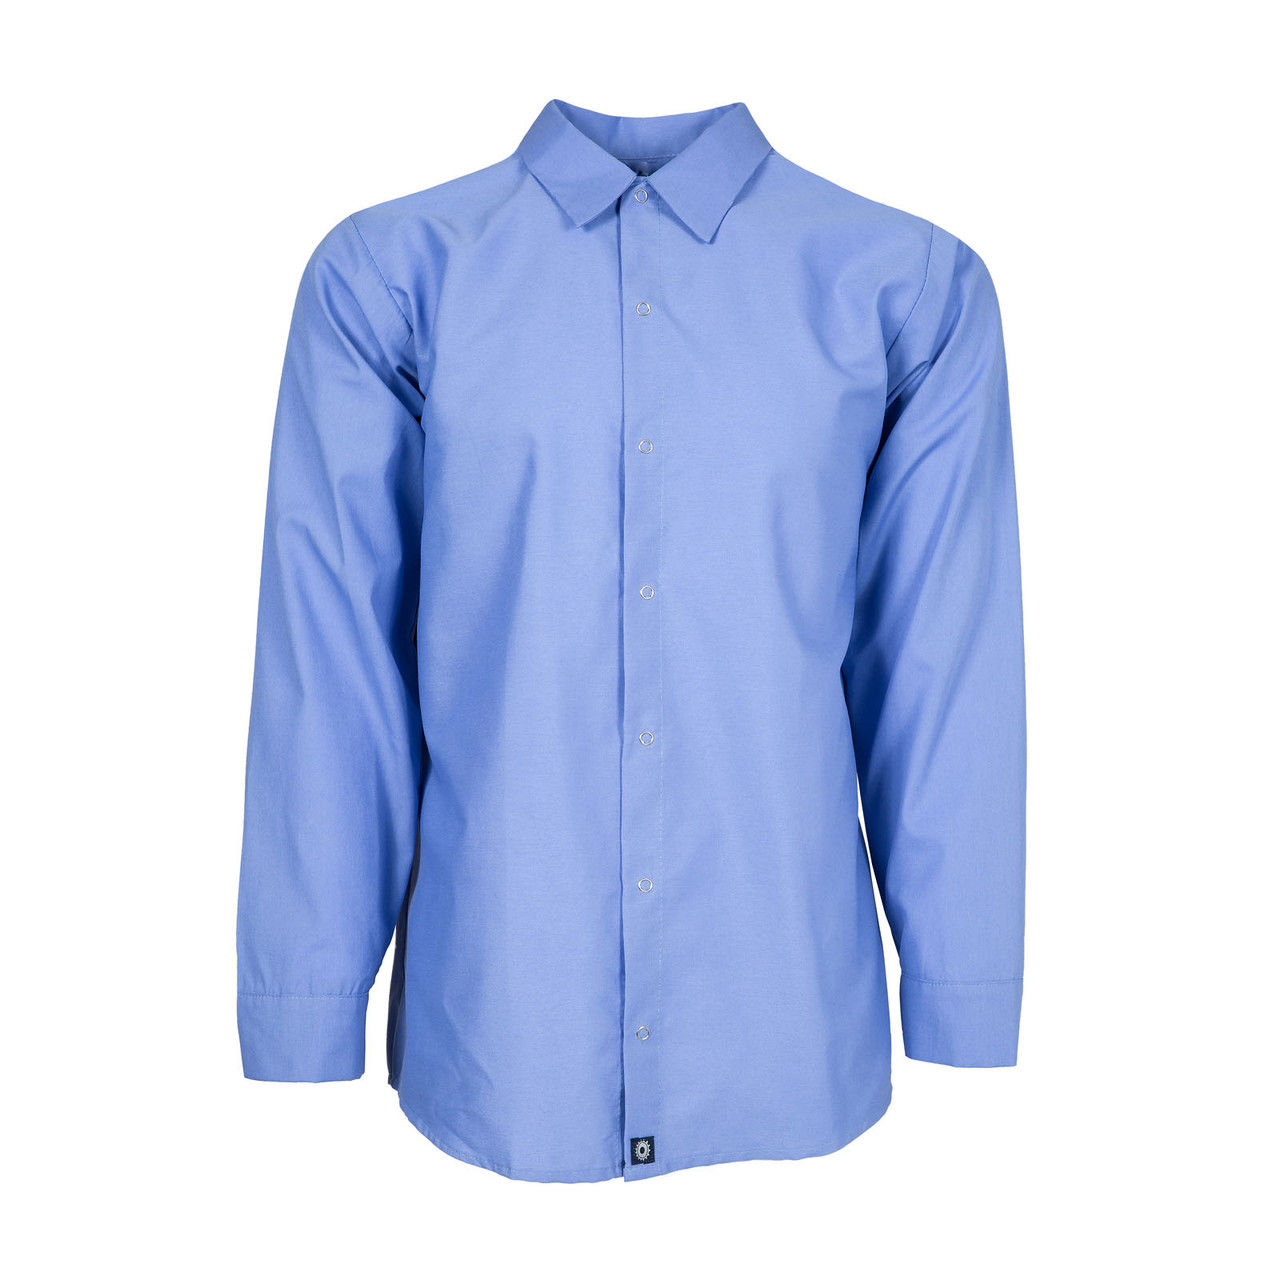 Can you confirm if the color of this blue work shirt womens is gulf blue?